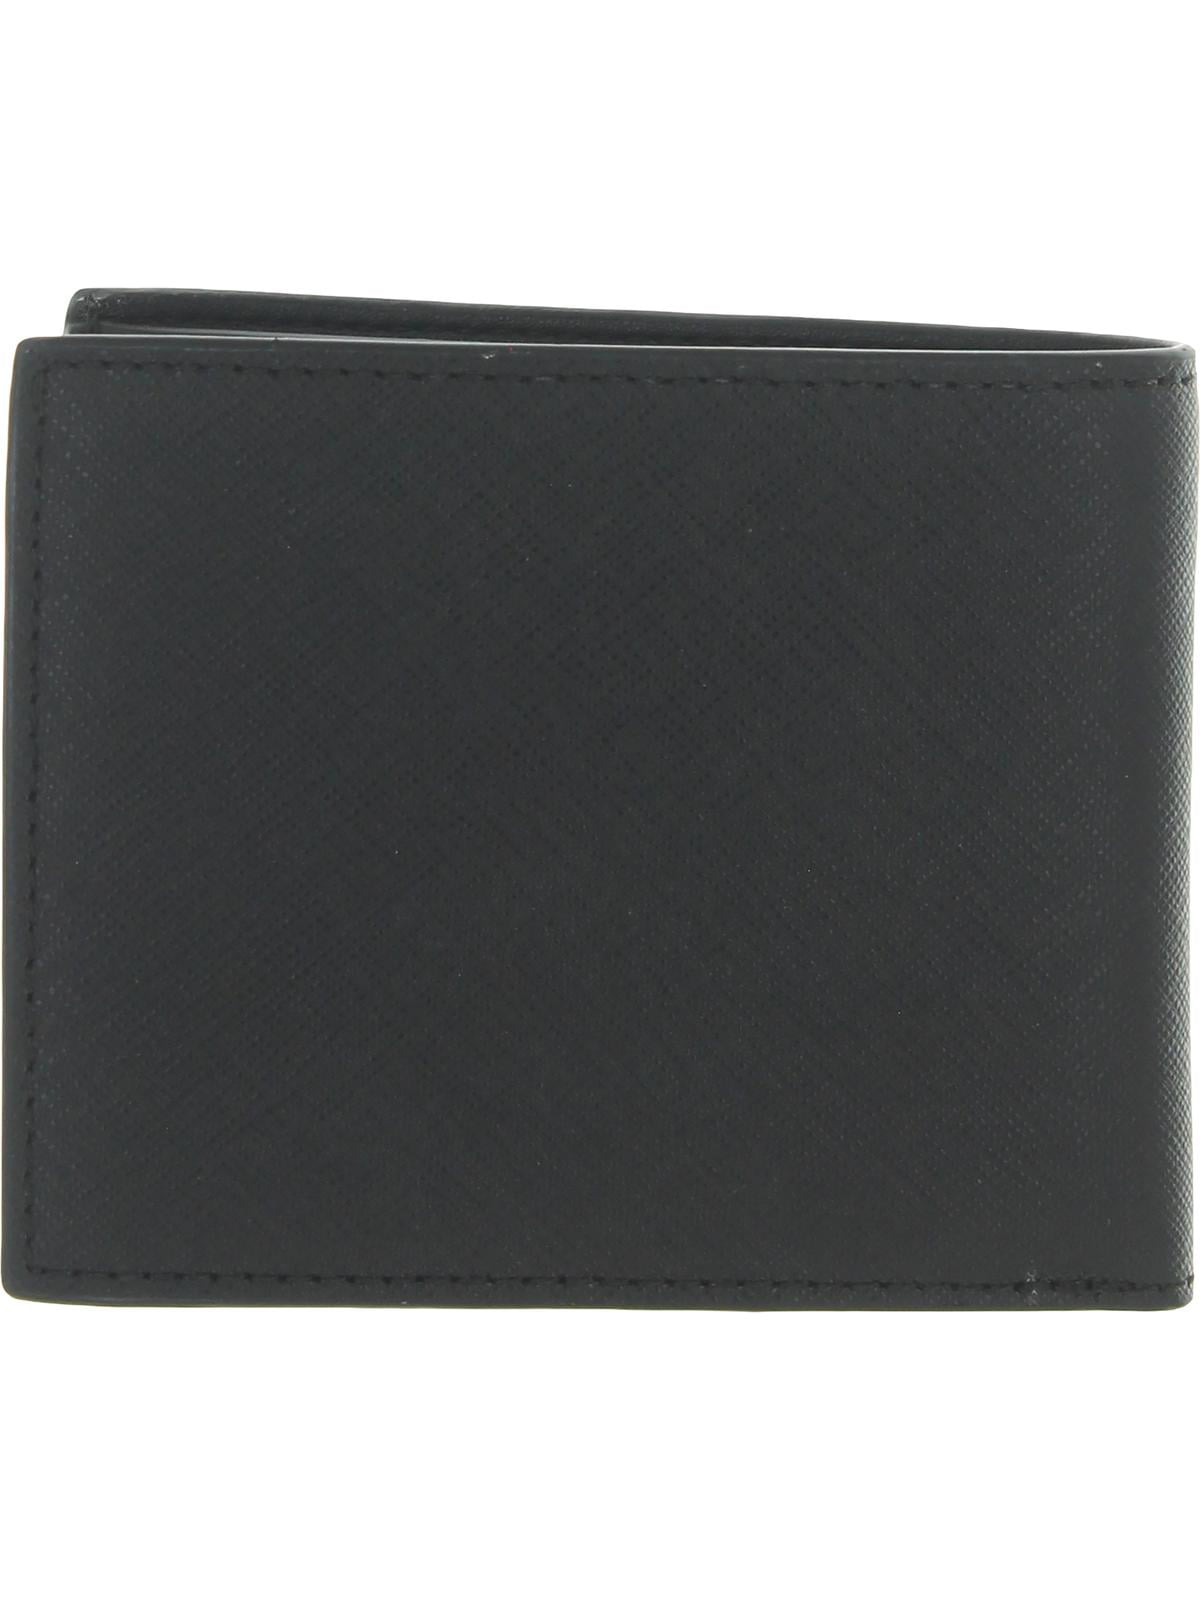 Michael Kors Mens Andy Leather Organizational Bifold Wallet Black Small 